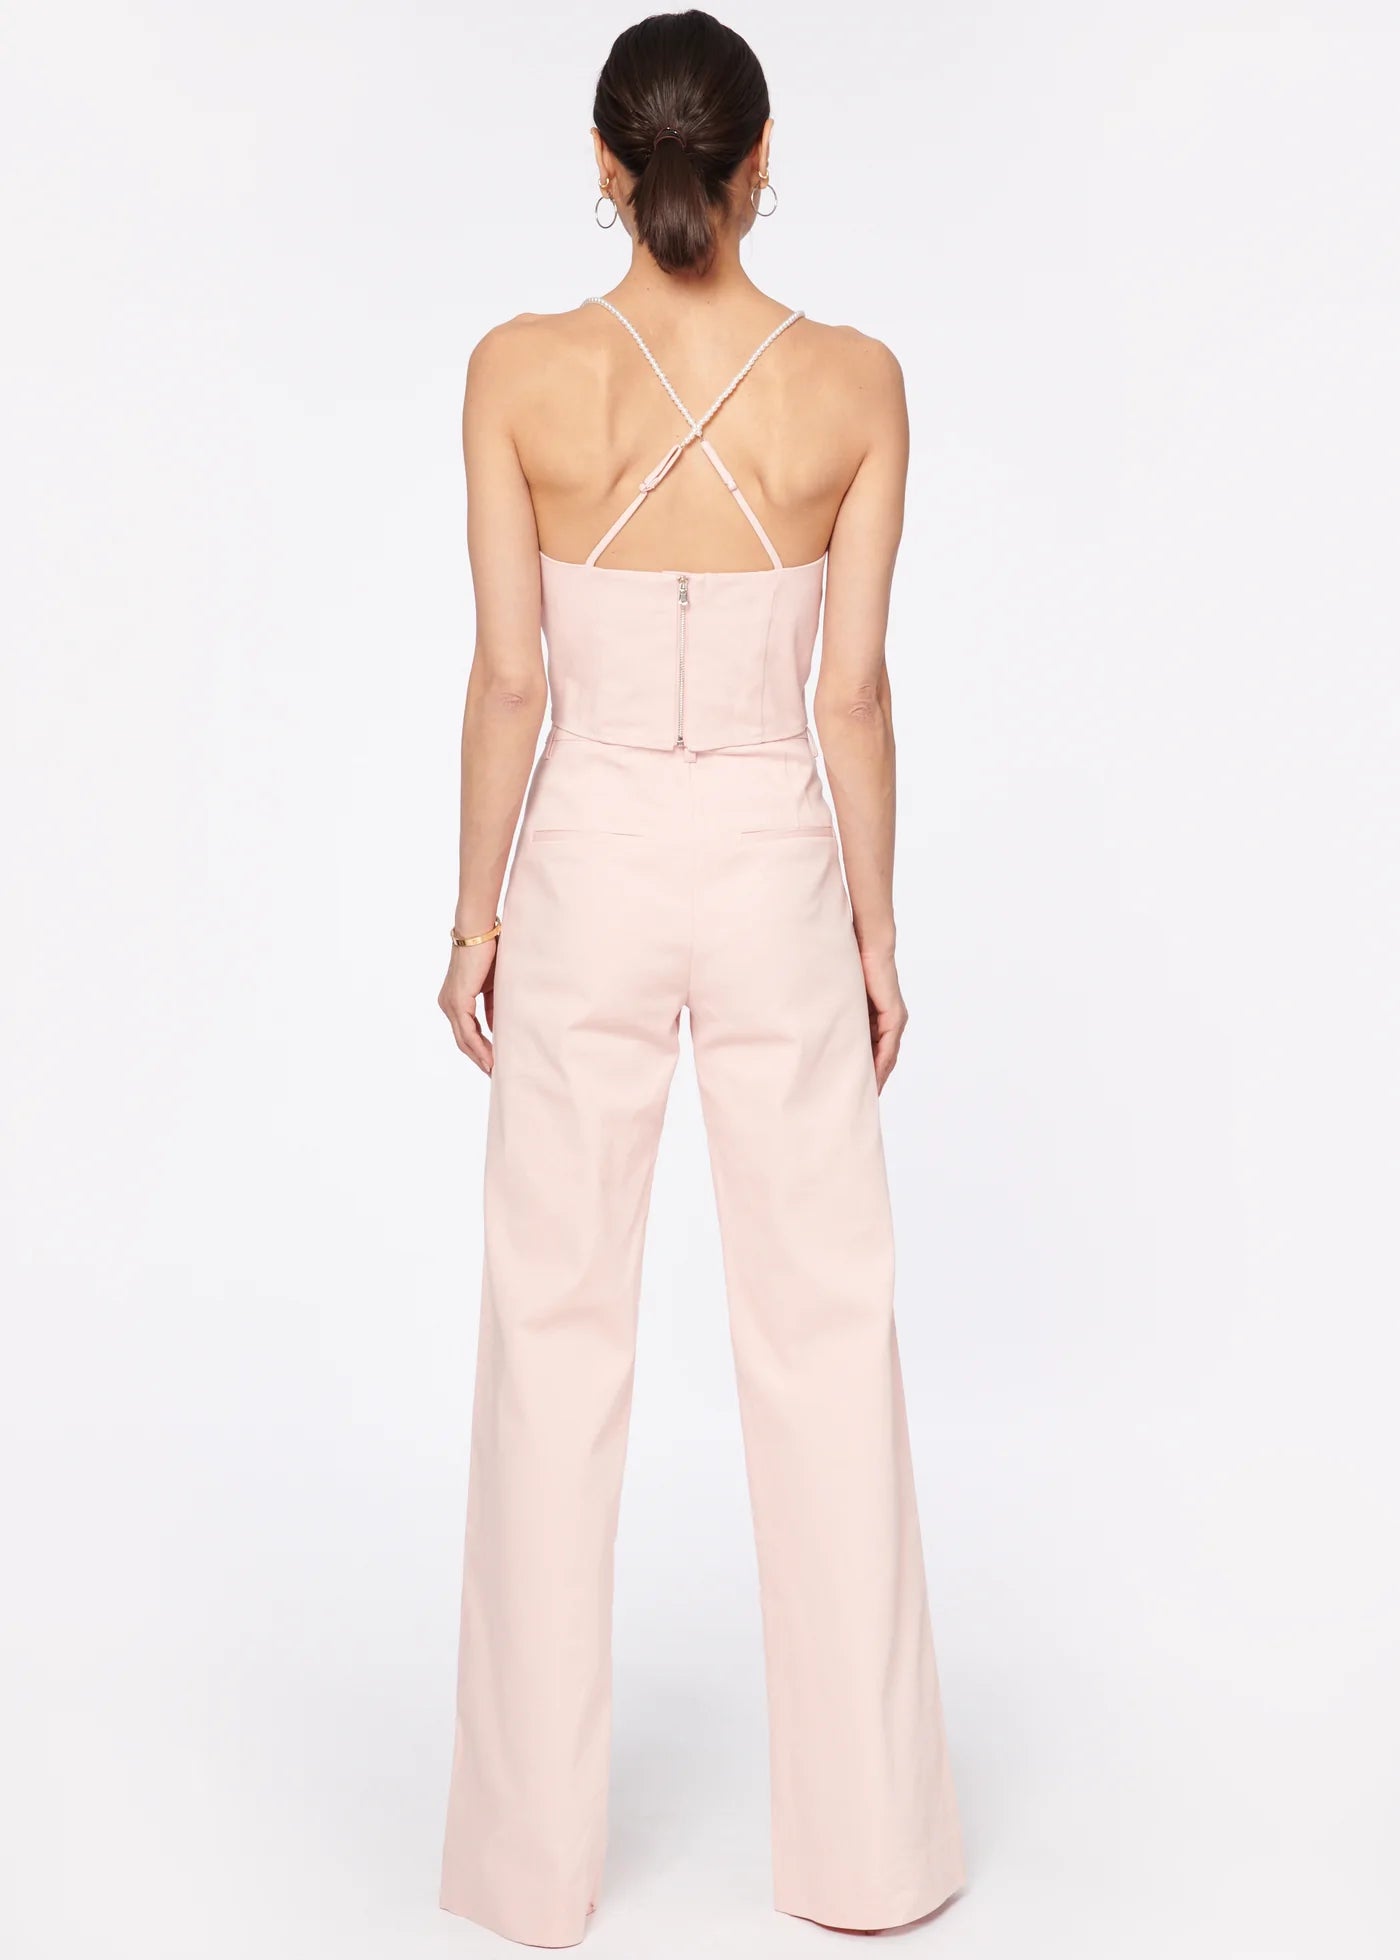 Cami NYC ‘Luanne Pant’